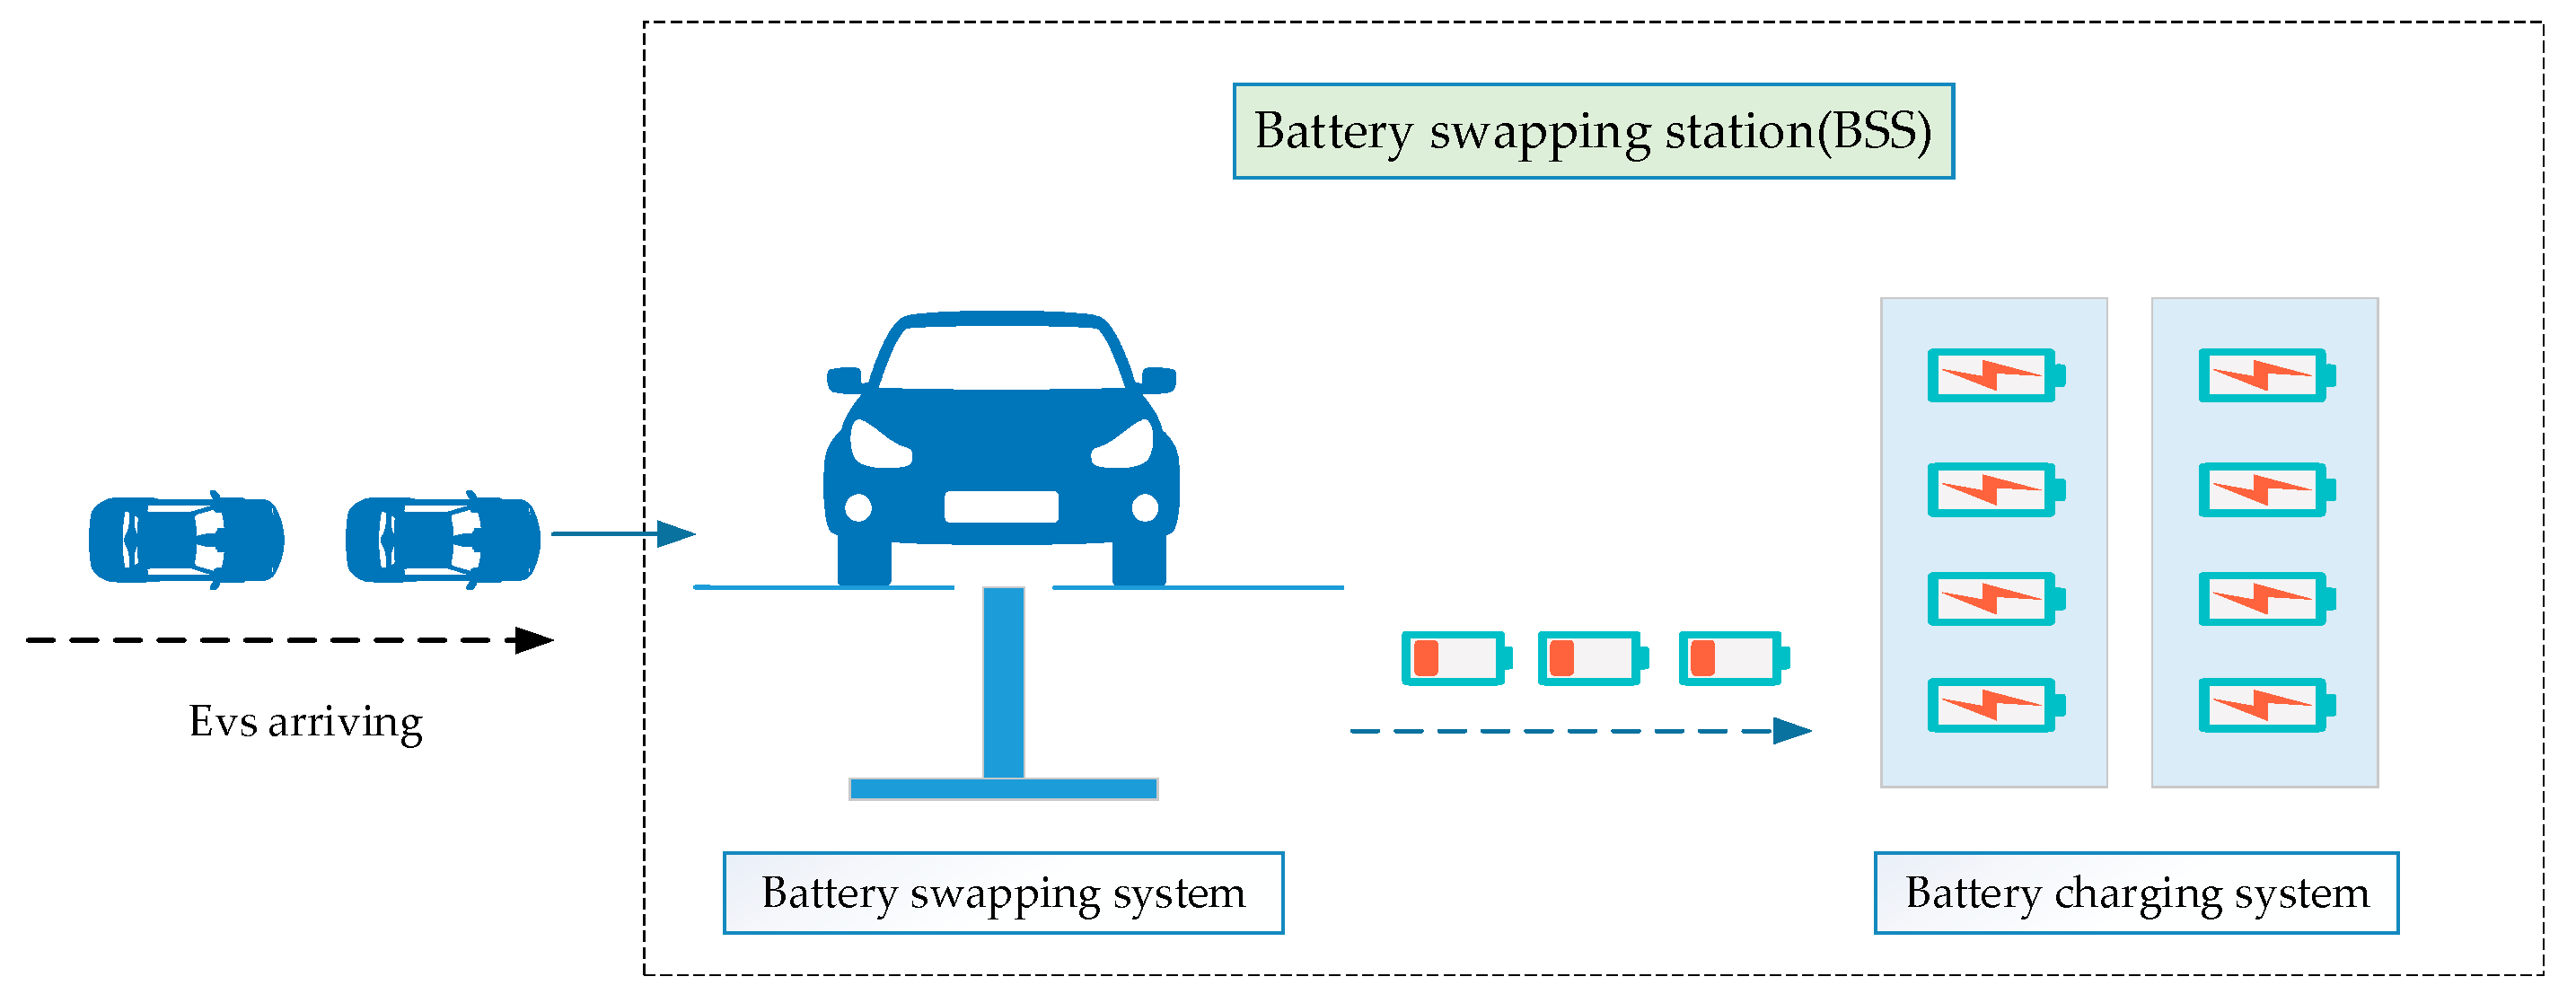 Battery Swapping Stations for Electric Vehicles Encyclopedia MDPI